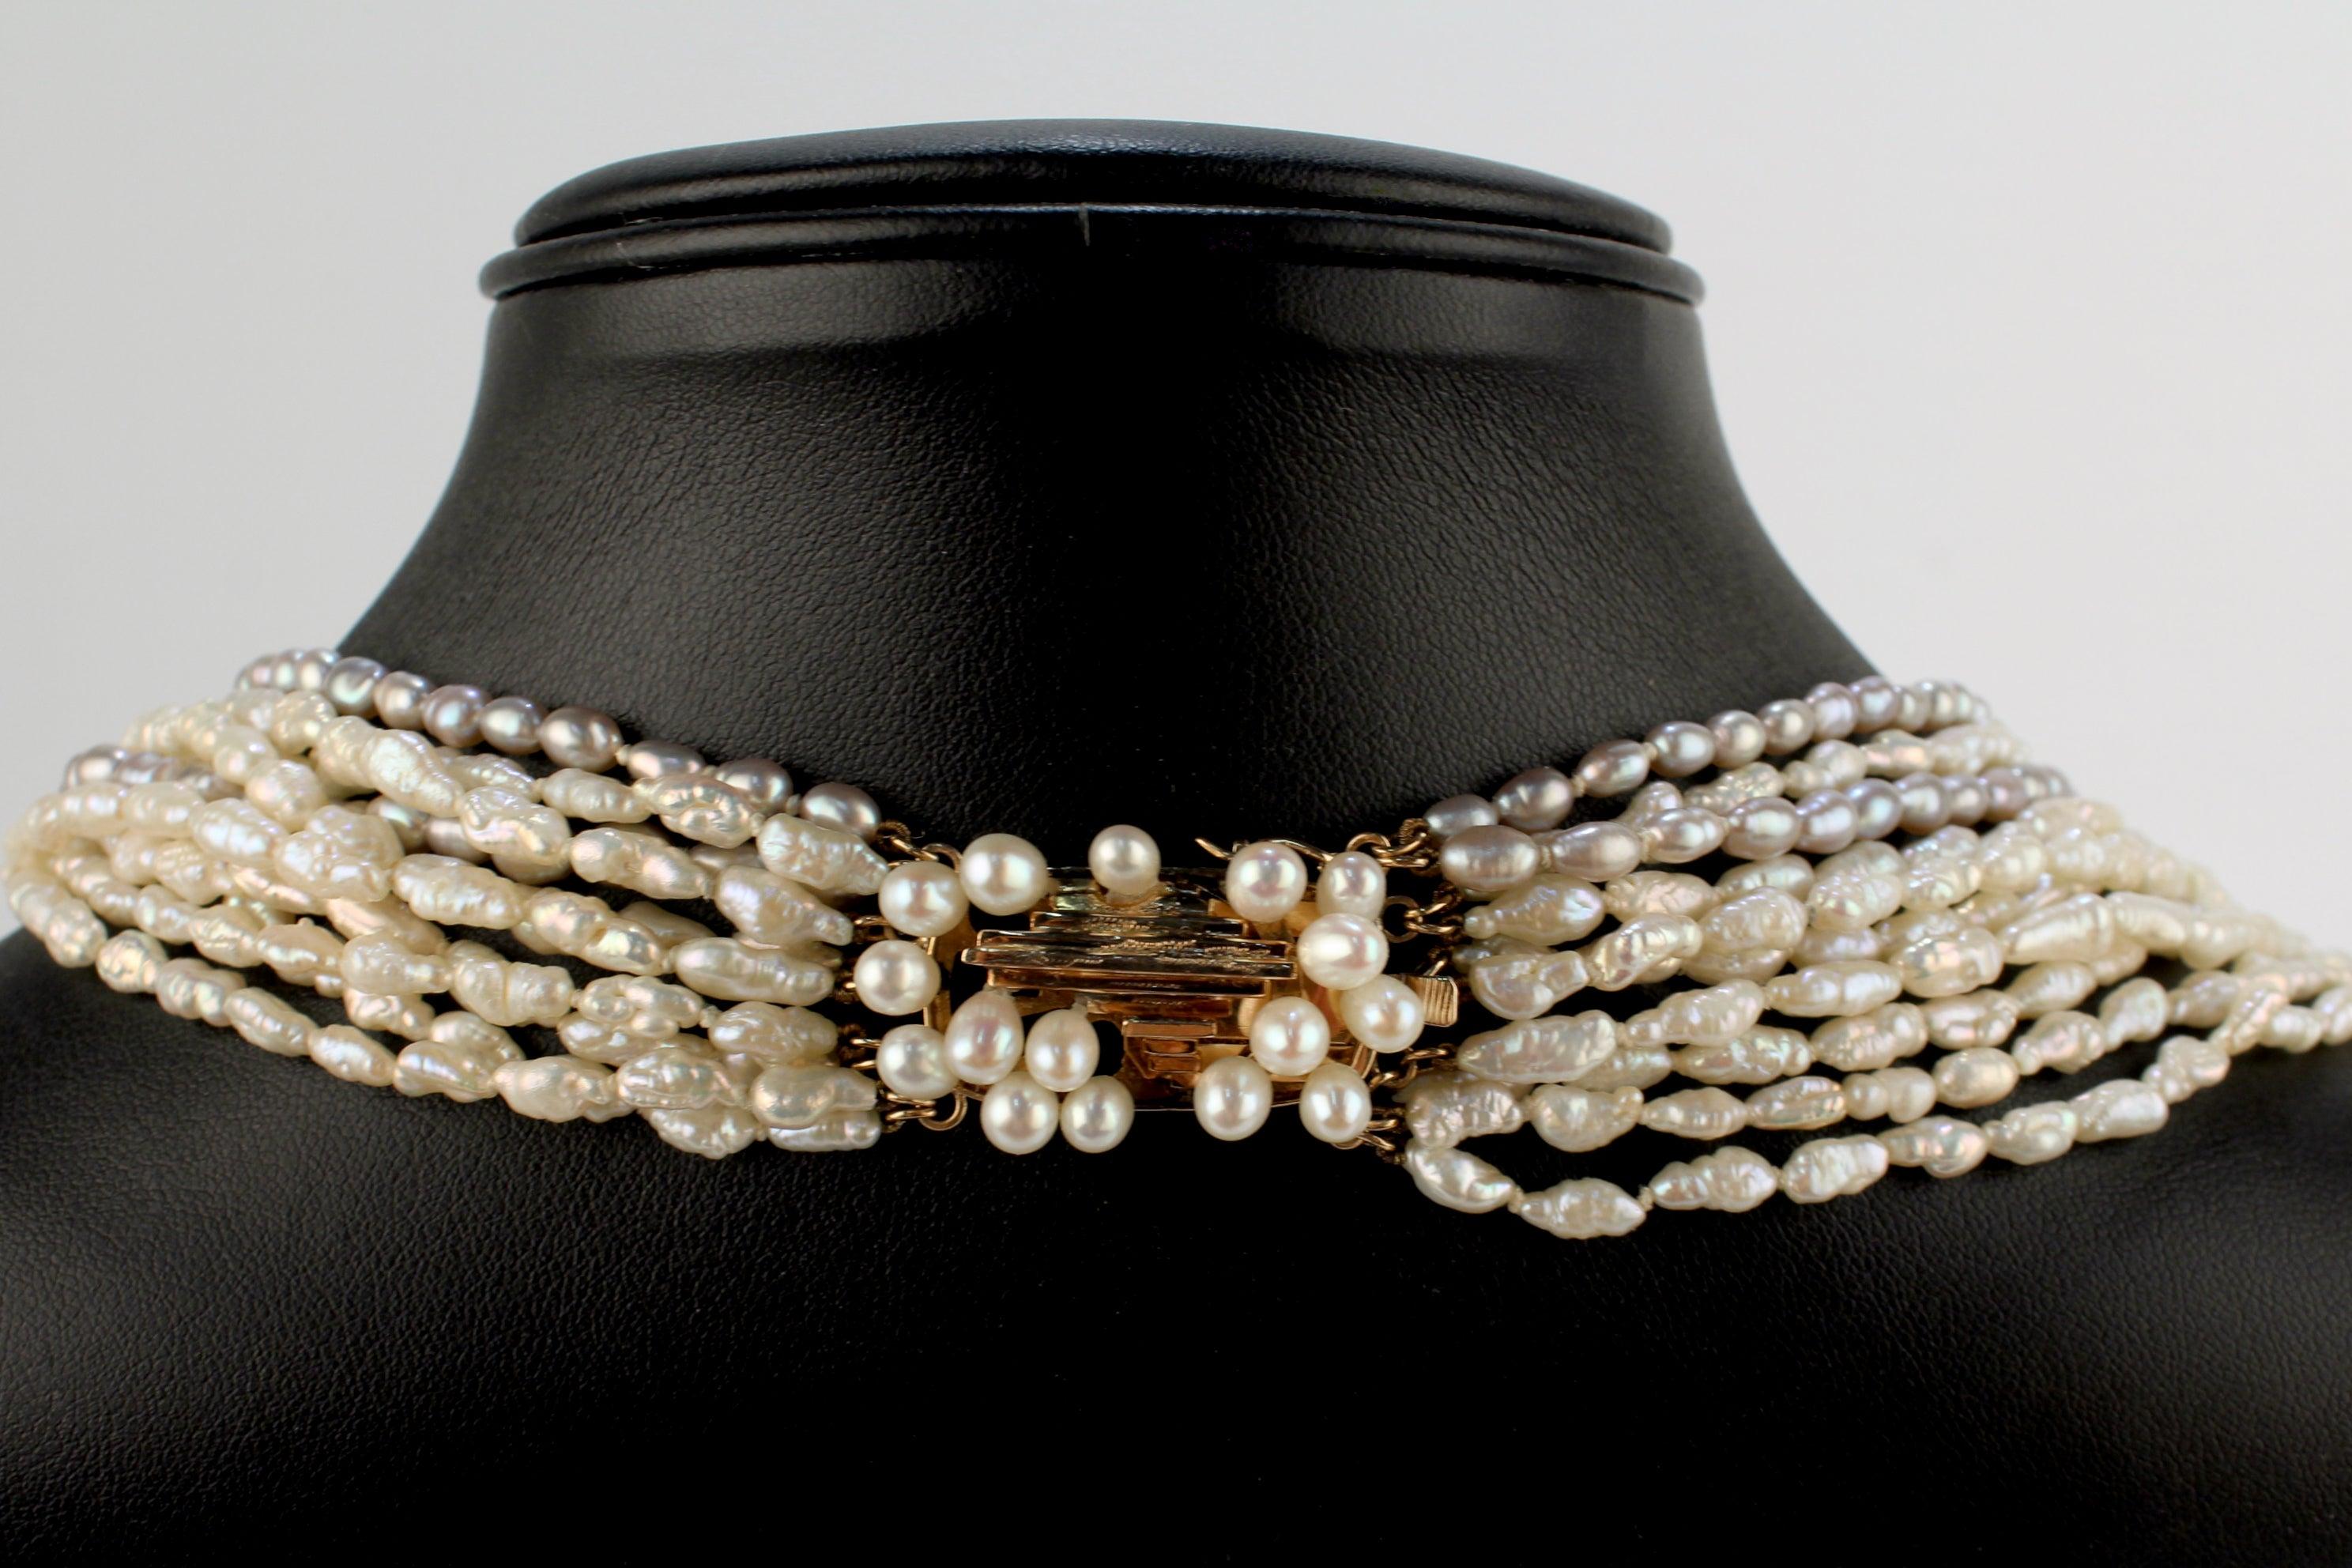 A very fine multi-strand freshwater pearl necklace with a Brutalist 14k gold clasp.

With elongated grey and white freshwater pearls hand-knotted on silk cord. 

Having a modern box clasp with a stepped gold top that is punctuated by additional